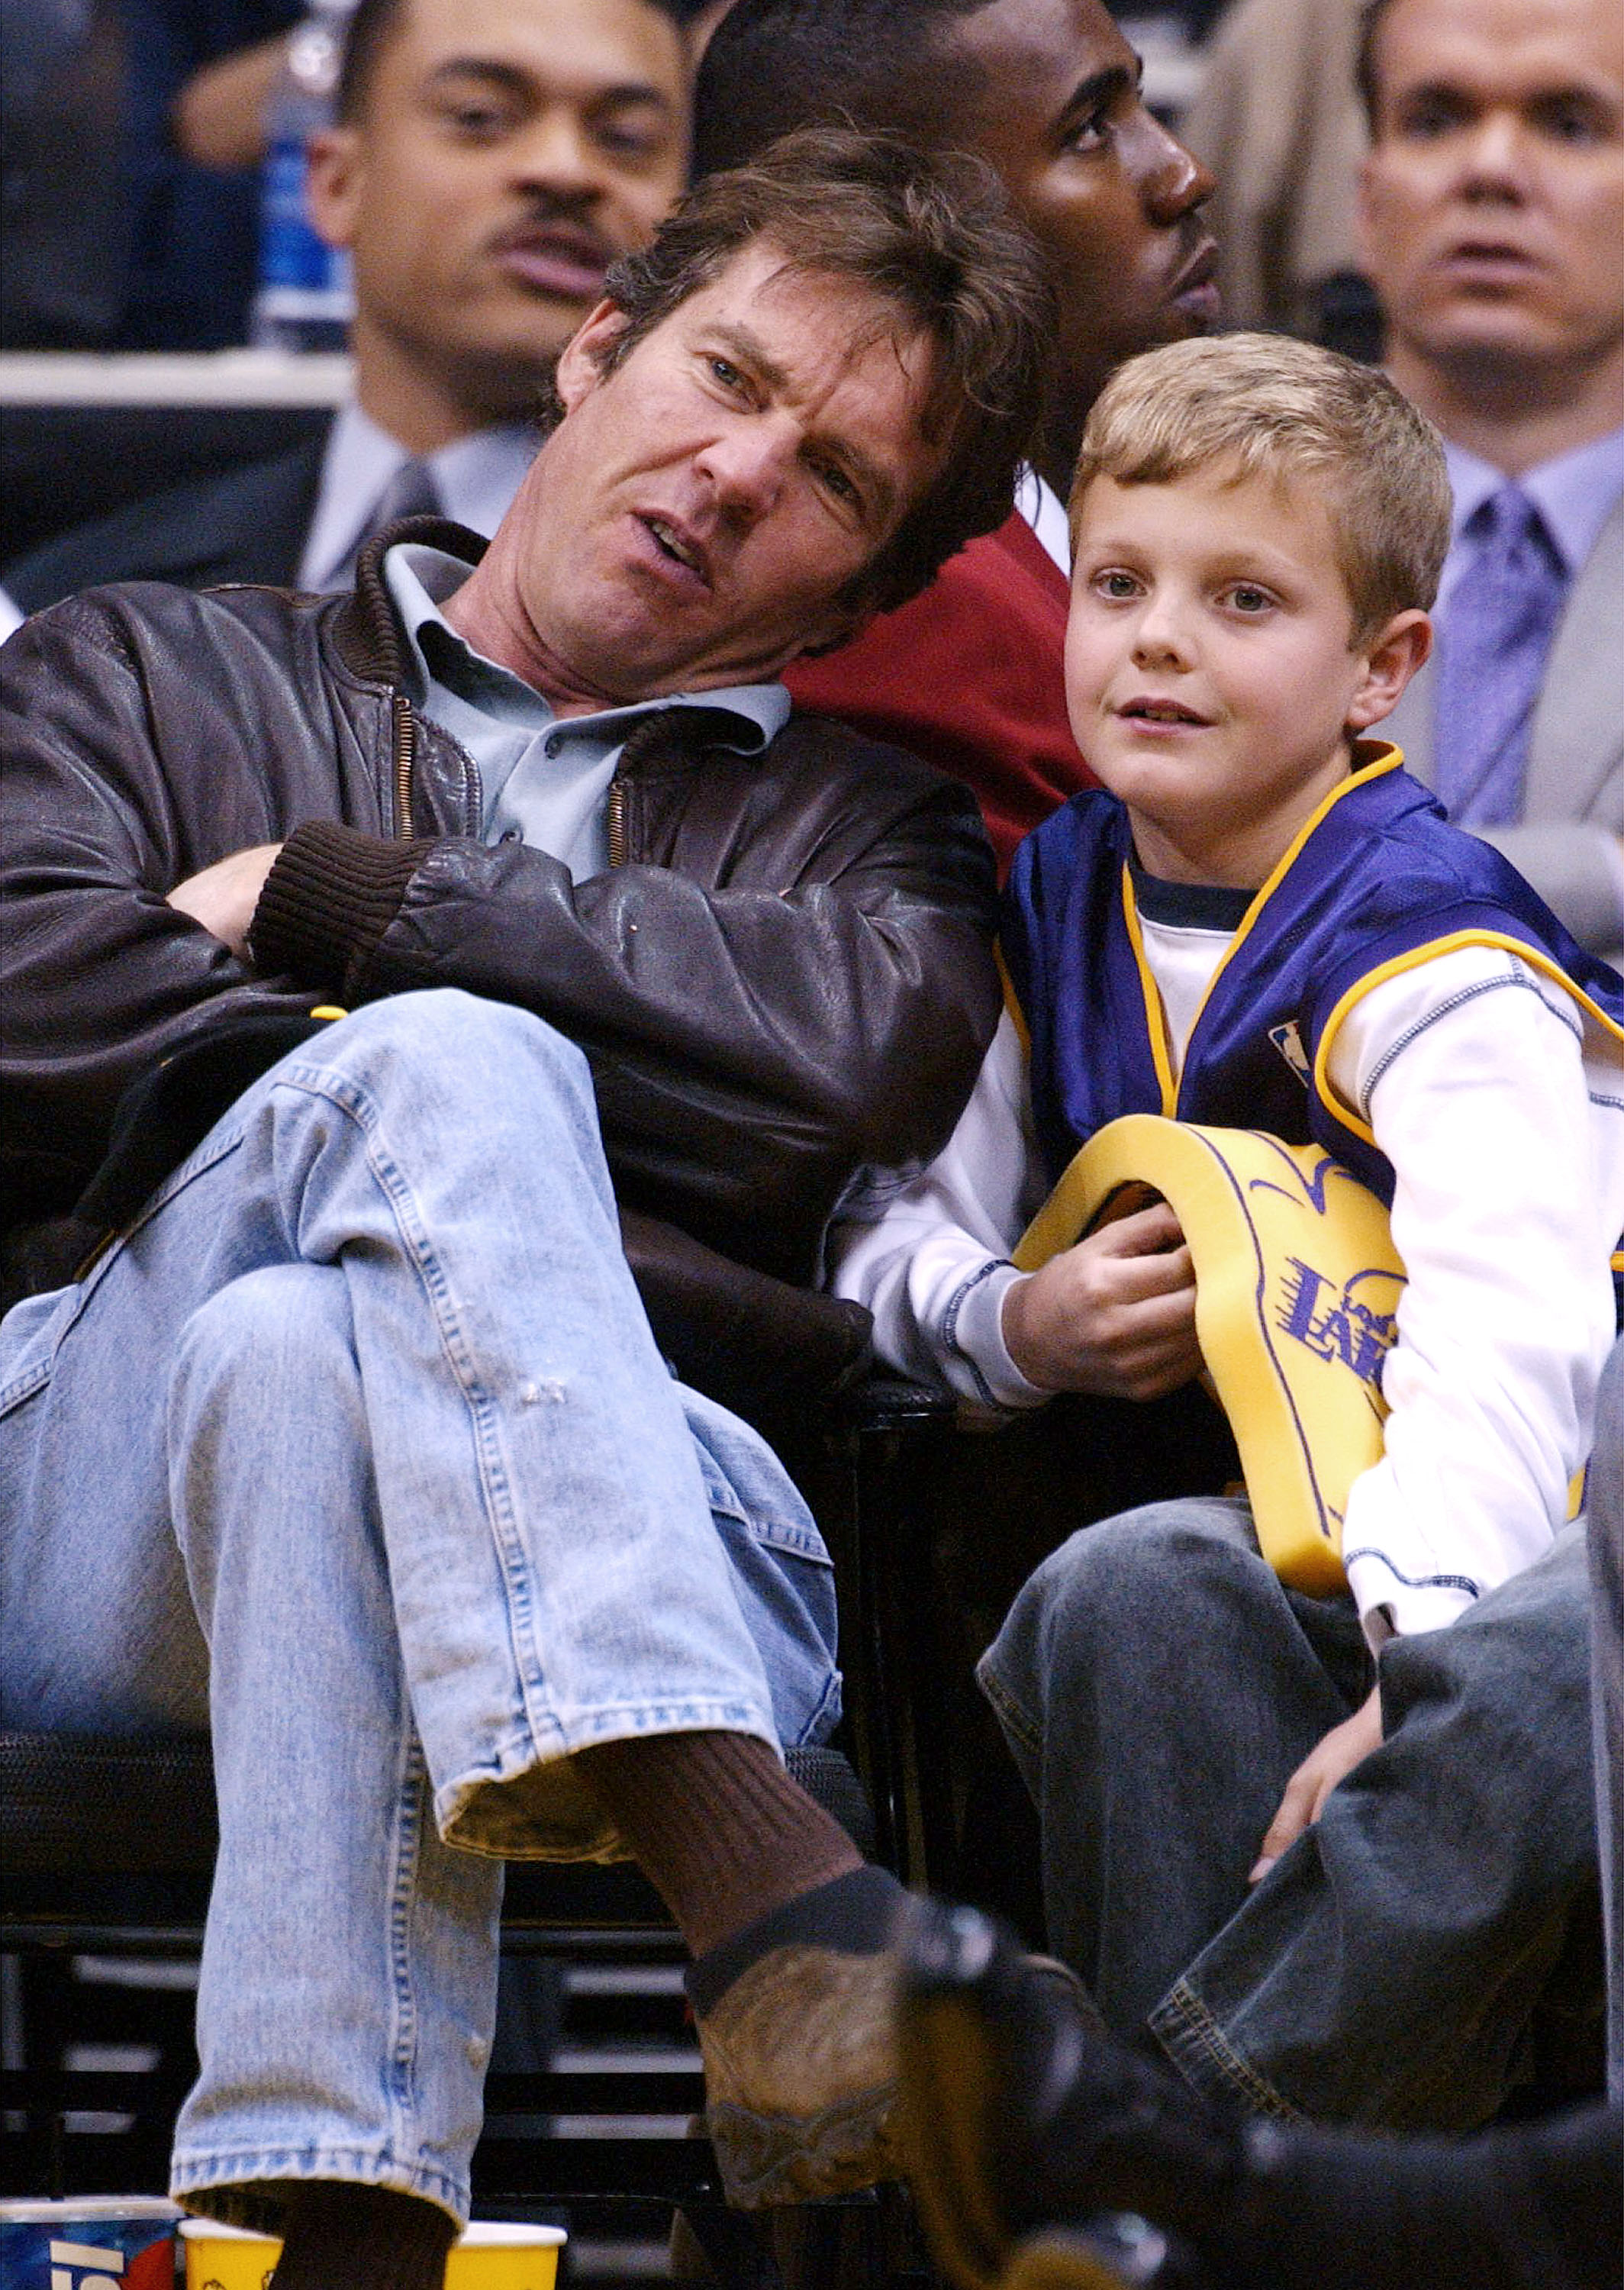 <p><a href="https://www.wonderwall.com/celebrity/profiles/overview/dennis-quaid-1083.article">Dennis Quaid</a> and Meg Ryan welcomed one child together -- Jack Quaid -- during their nearly 10-year marriage. He's seen here at 10 with his dad at a Los Angeles Lakers game on Feb. 21, 2003. Keep reading to see Jack -- who's an actor like his parents -- all grown up...</p>